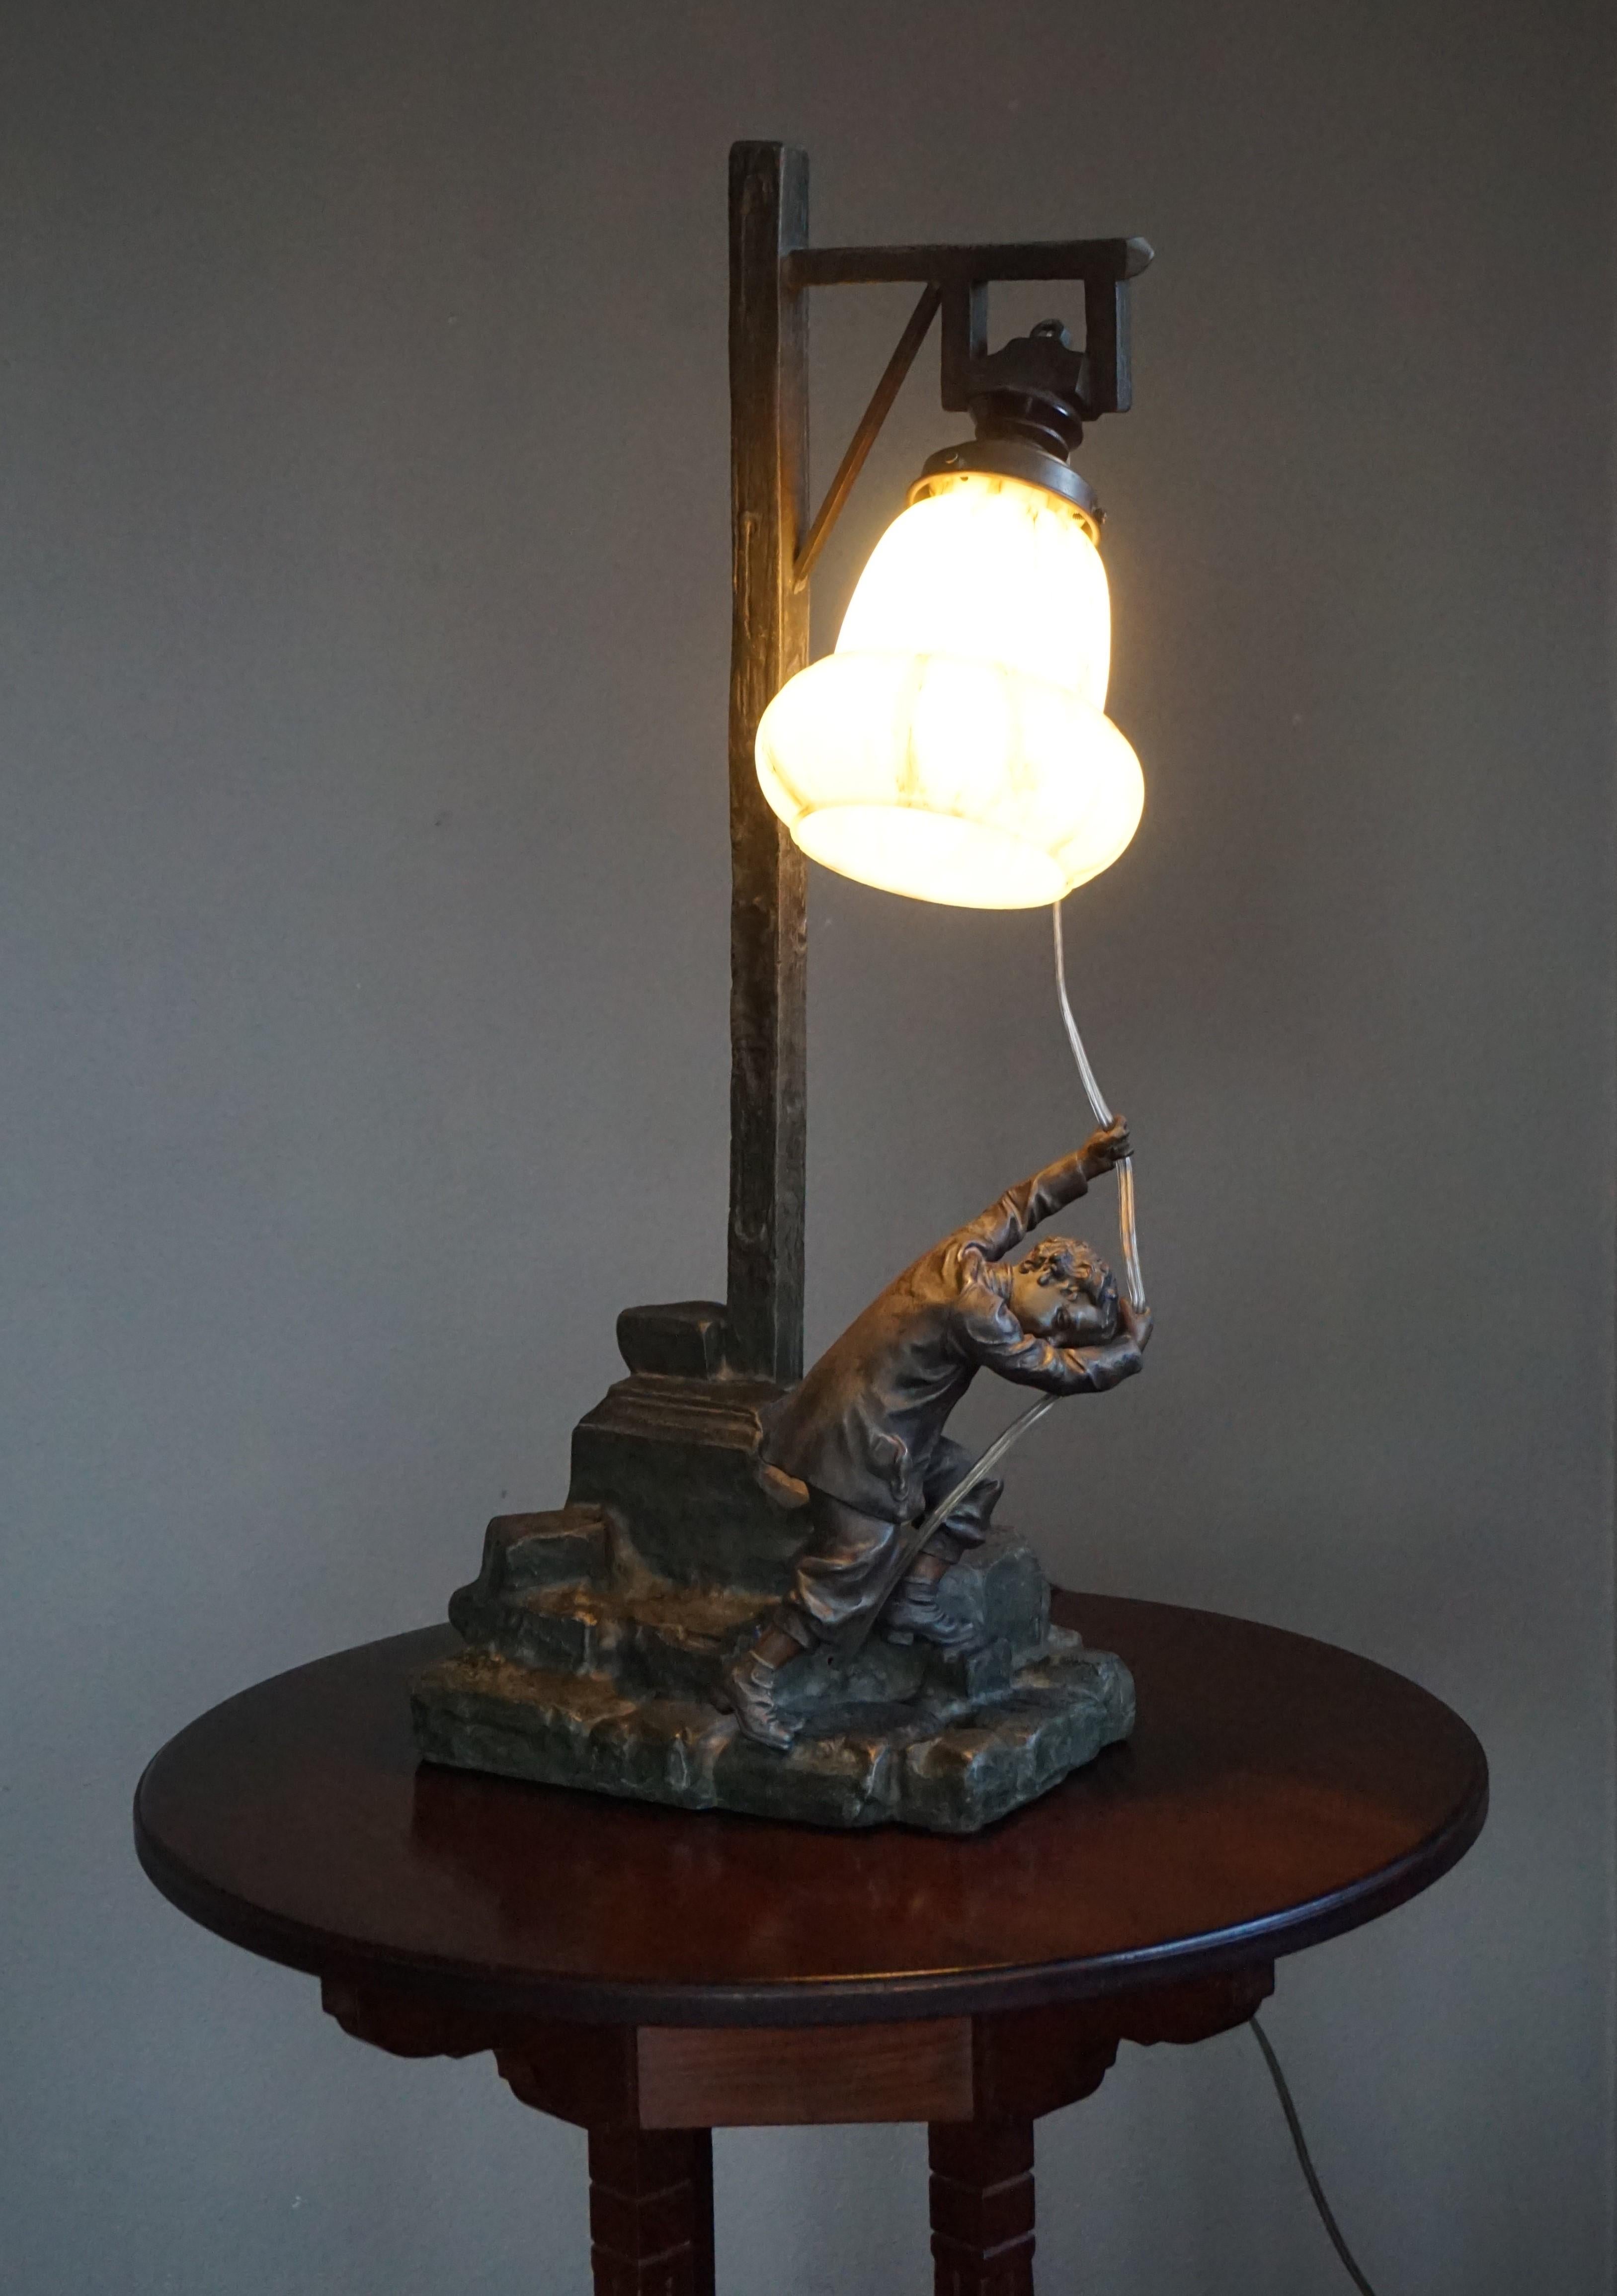 Large and highly decorative antique table lamp with stunning quality boy sculpture.

If you are looking for a rare and meaningful table lamp that is also great to look at, then this could be the one for you. At the center of this early 20th century